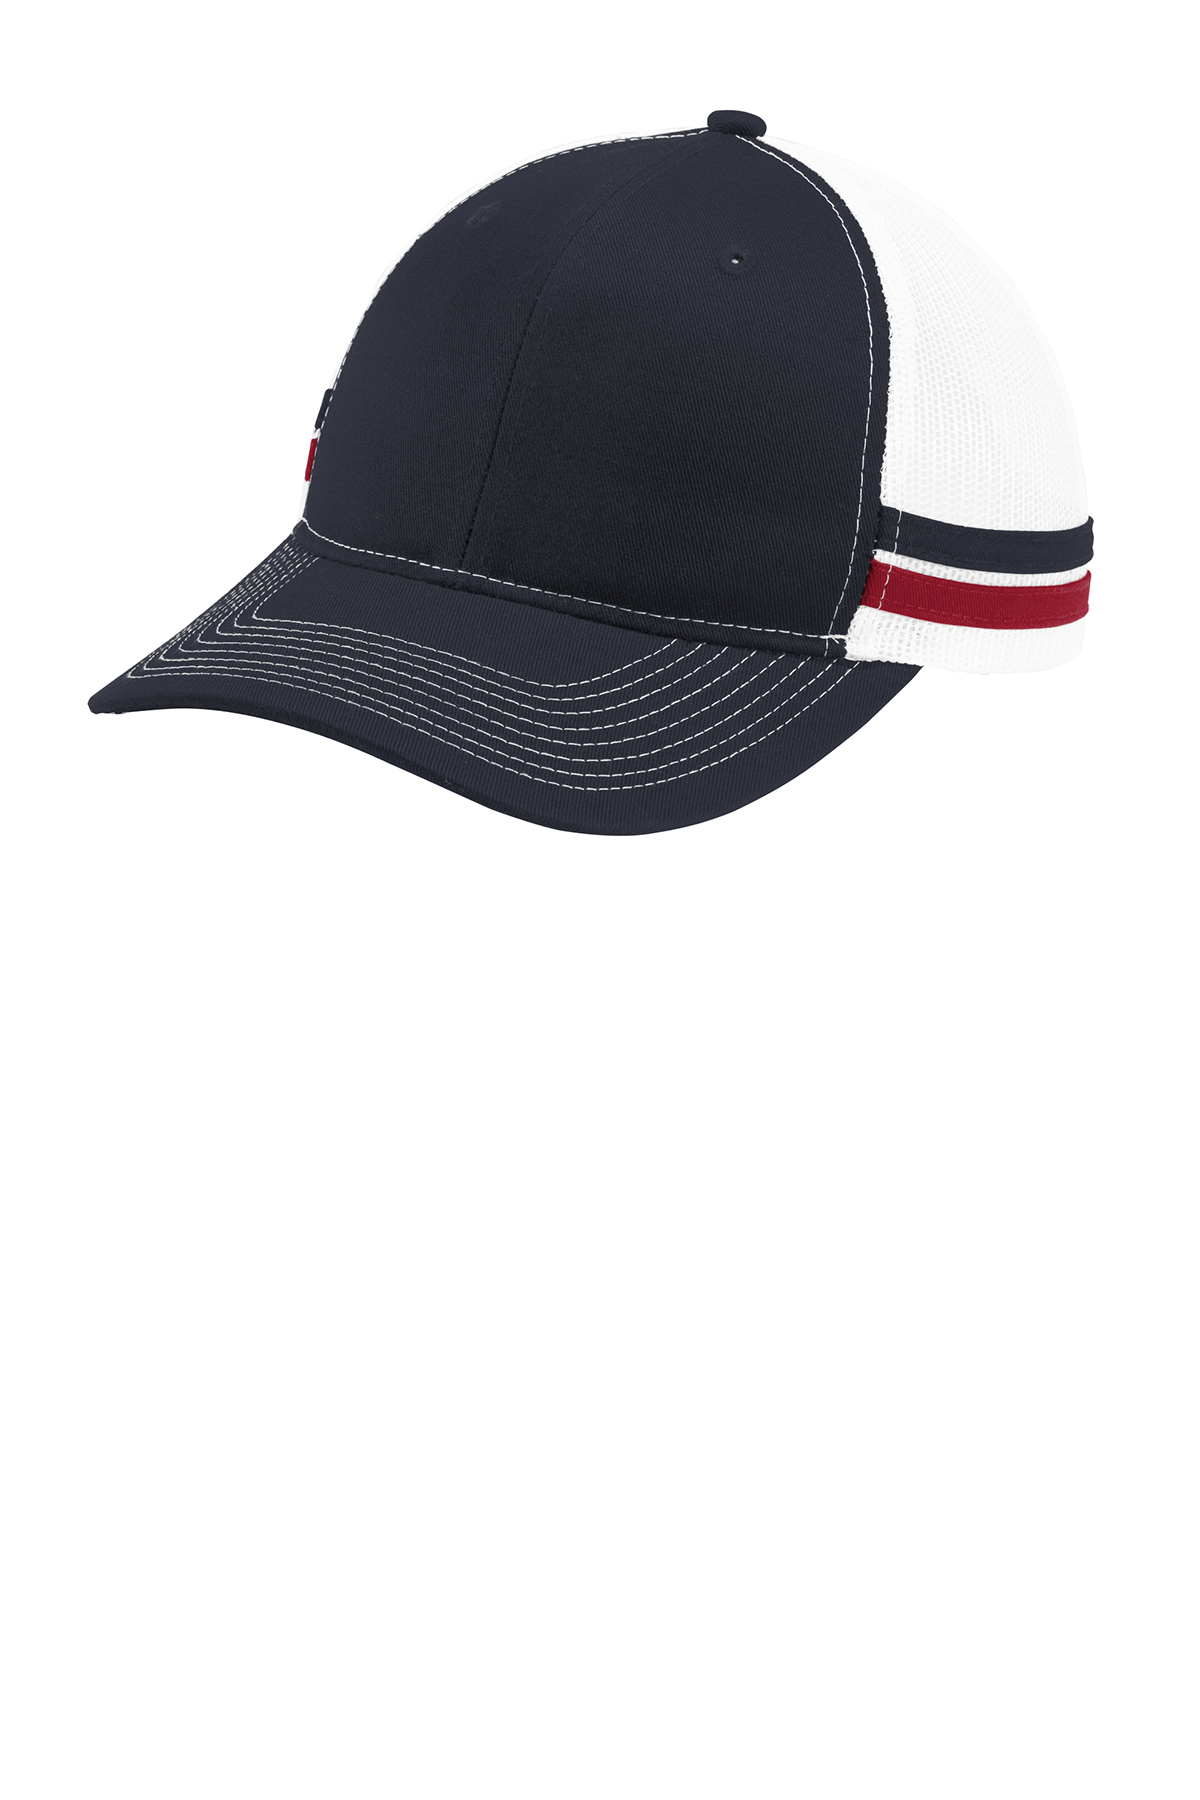 click to view Rich Navy/ Flame Red/ White